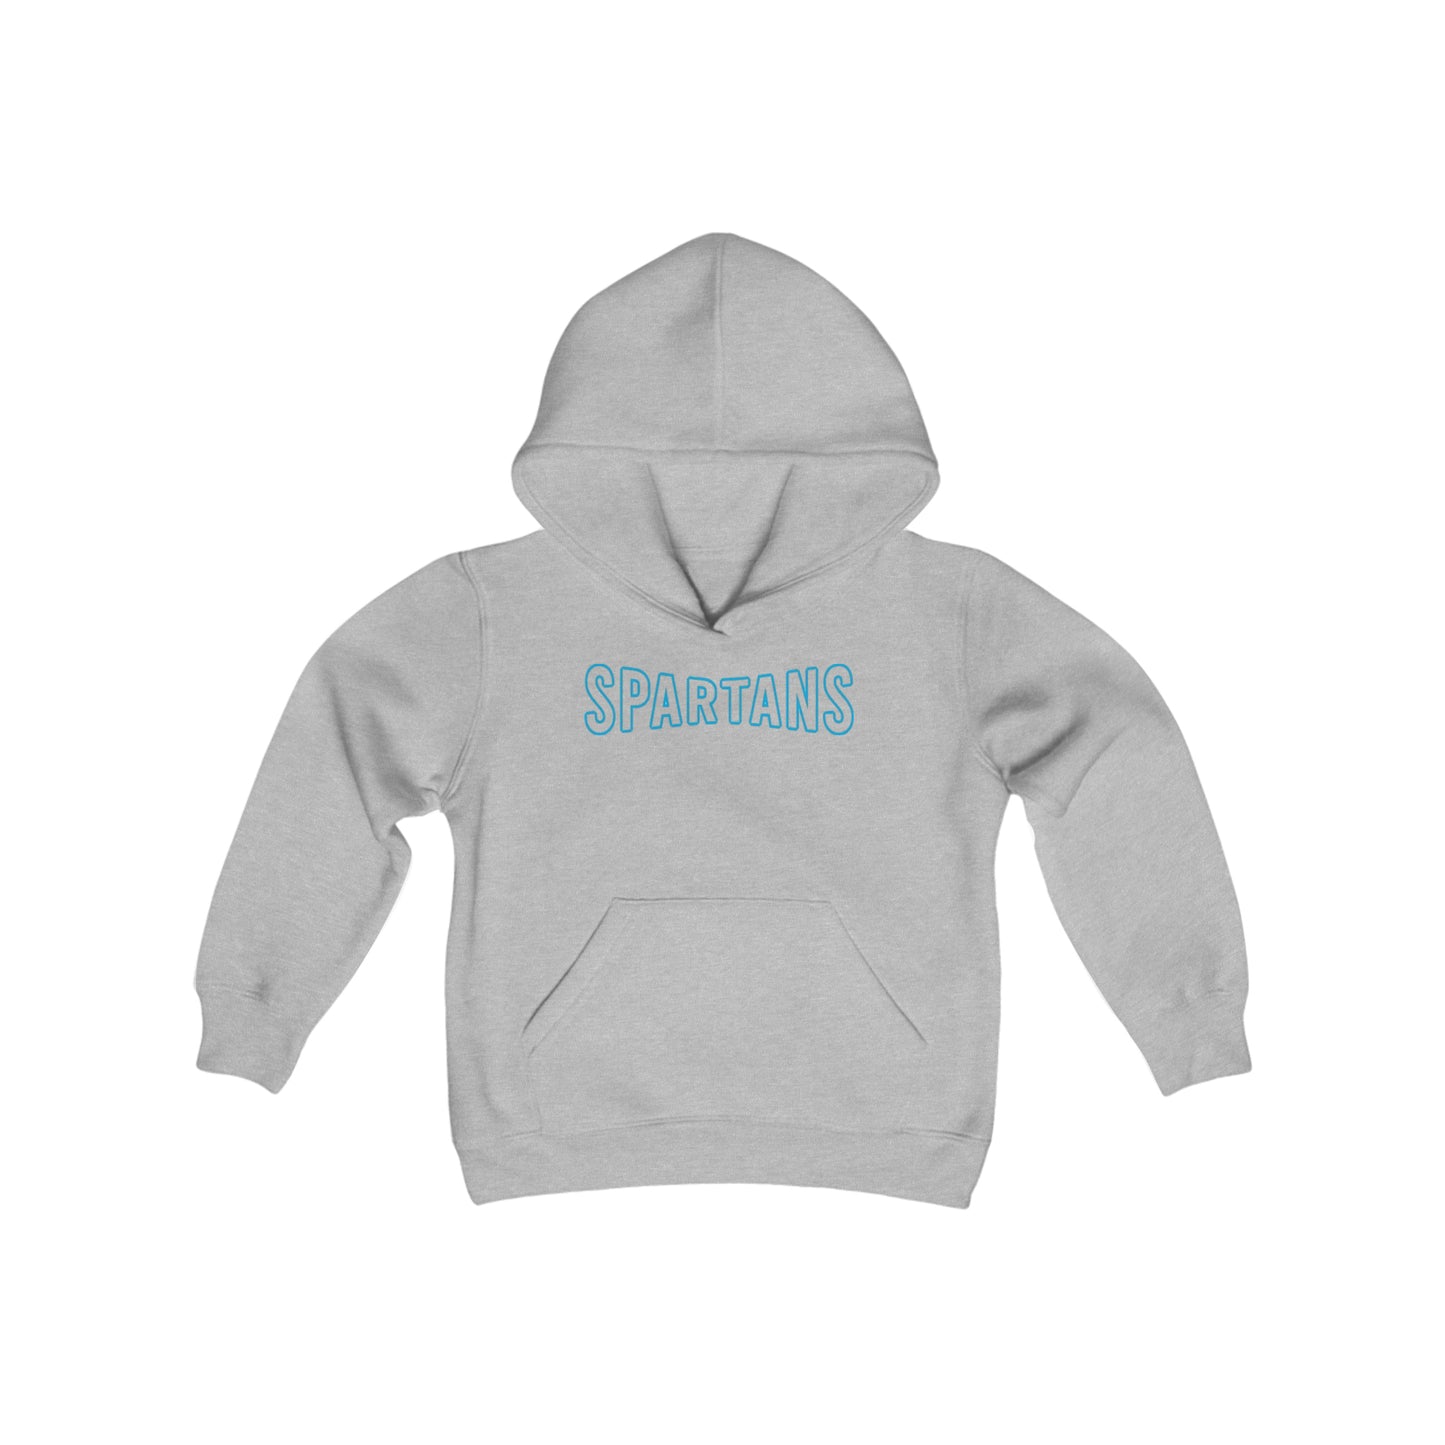 SPARTANS YOUTH COTTON HOODIE